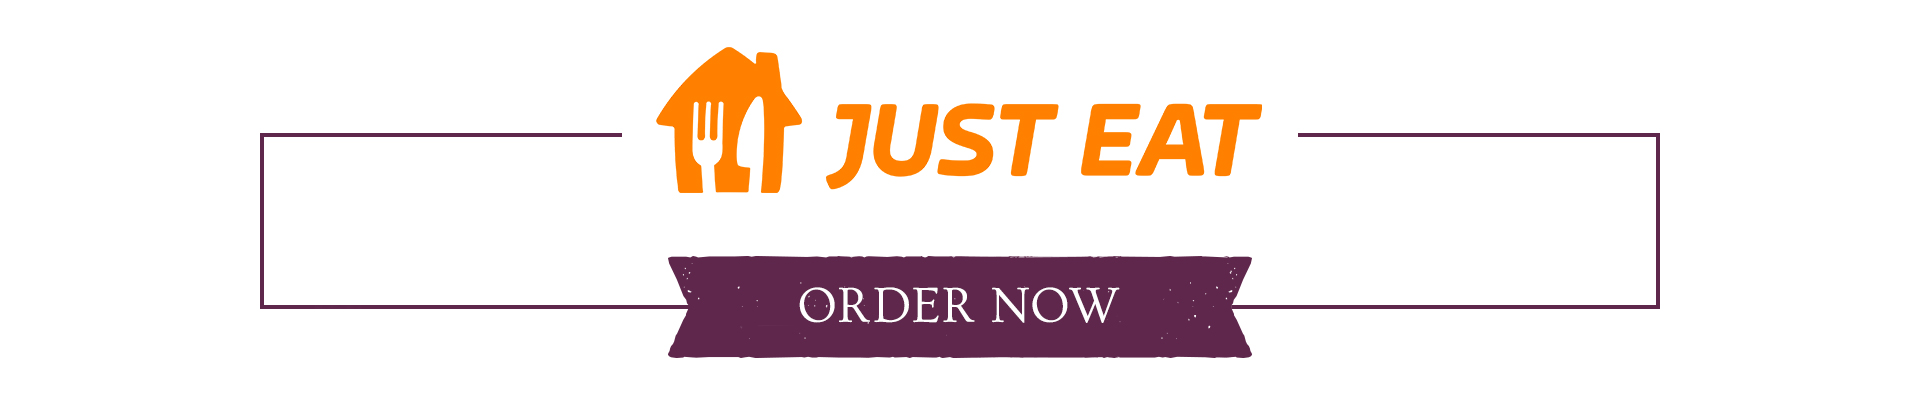 core-justeat-justeat-thin-banner.jpg